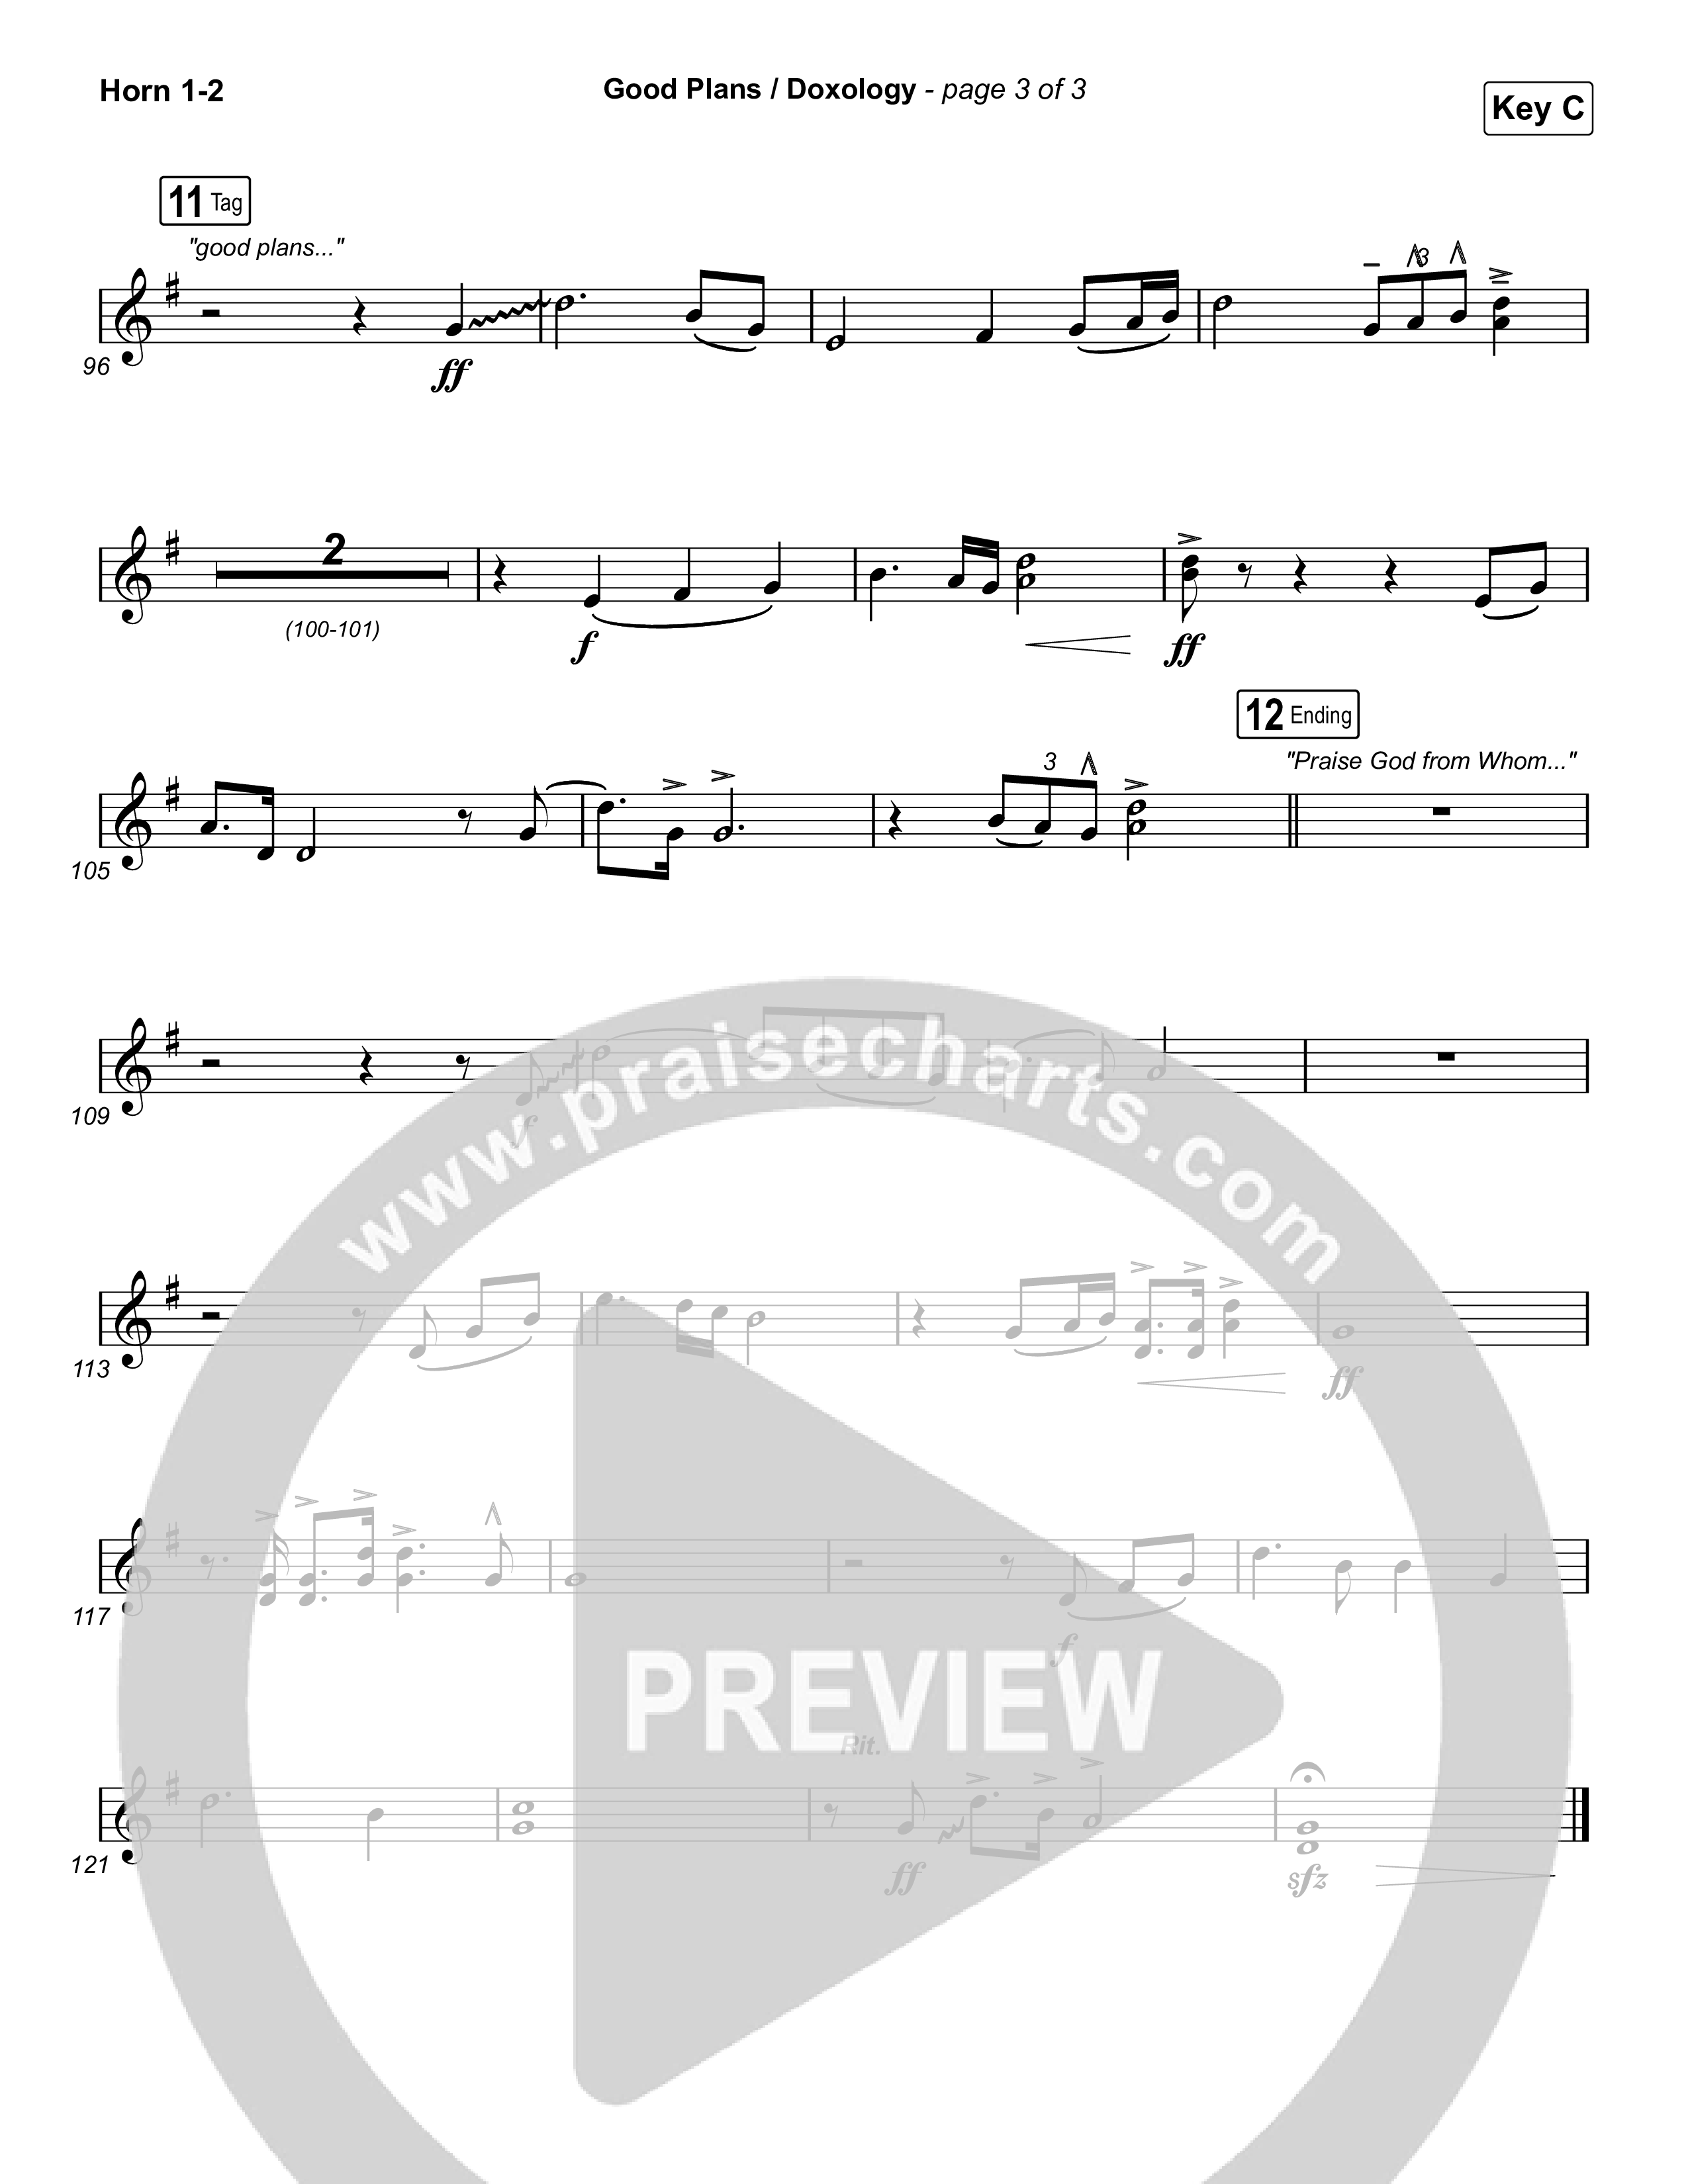 Good Plans/Doxology French Horn 1,2 (Red Rocks Worship)